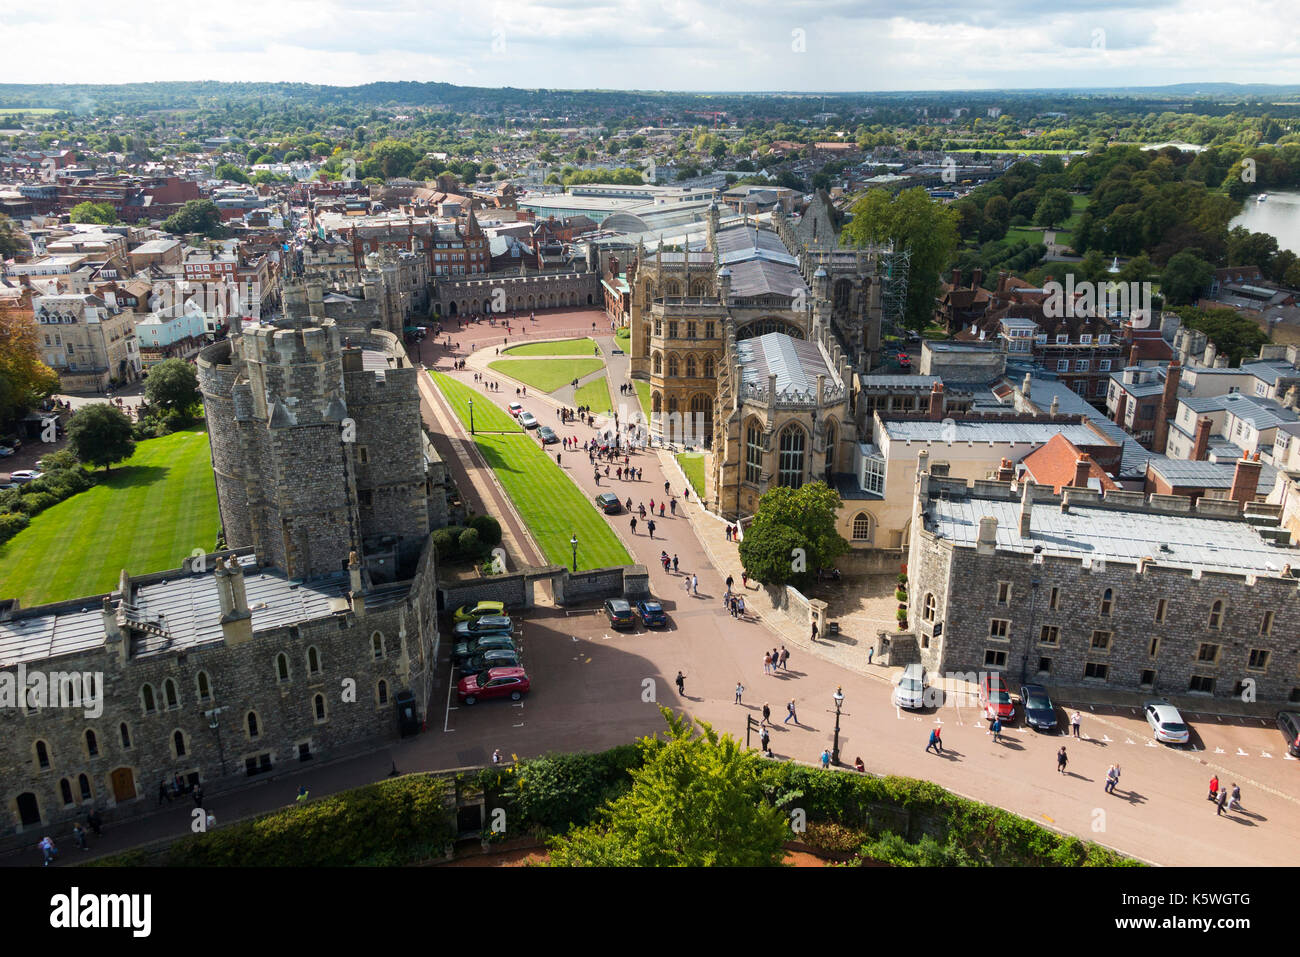 View of the Lower Ward of Windsor Castle including Saint Georges Chapel including its defensive walls & towers, and accommodation. Windsor, UK. (90) Stock Photo